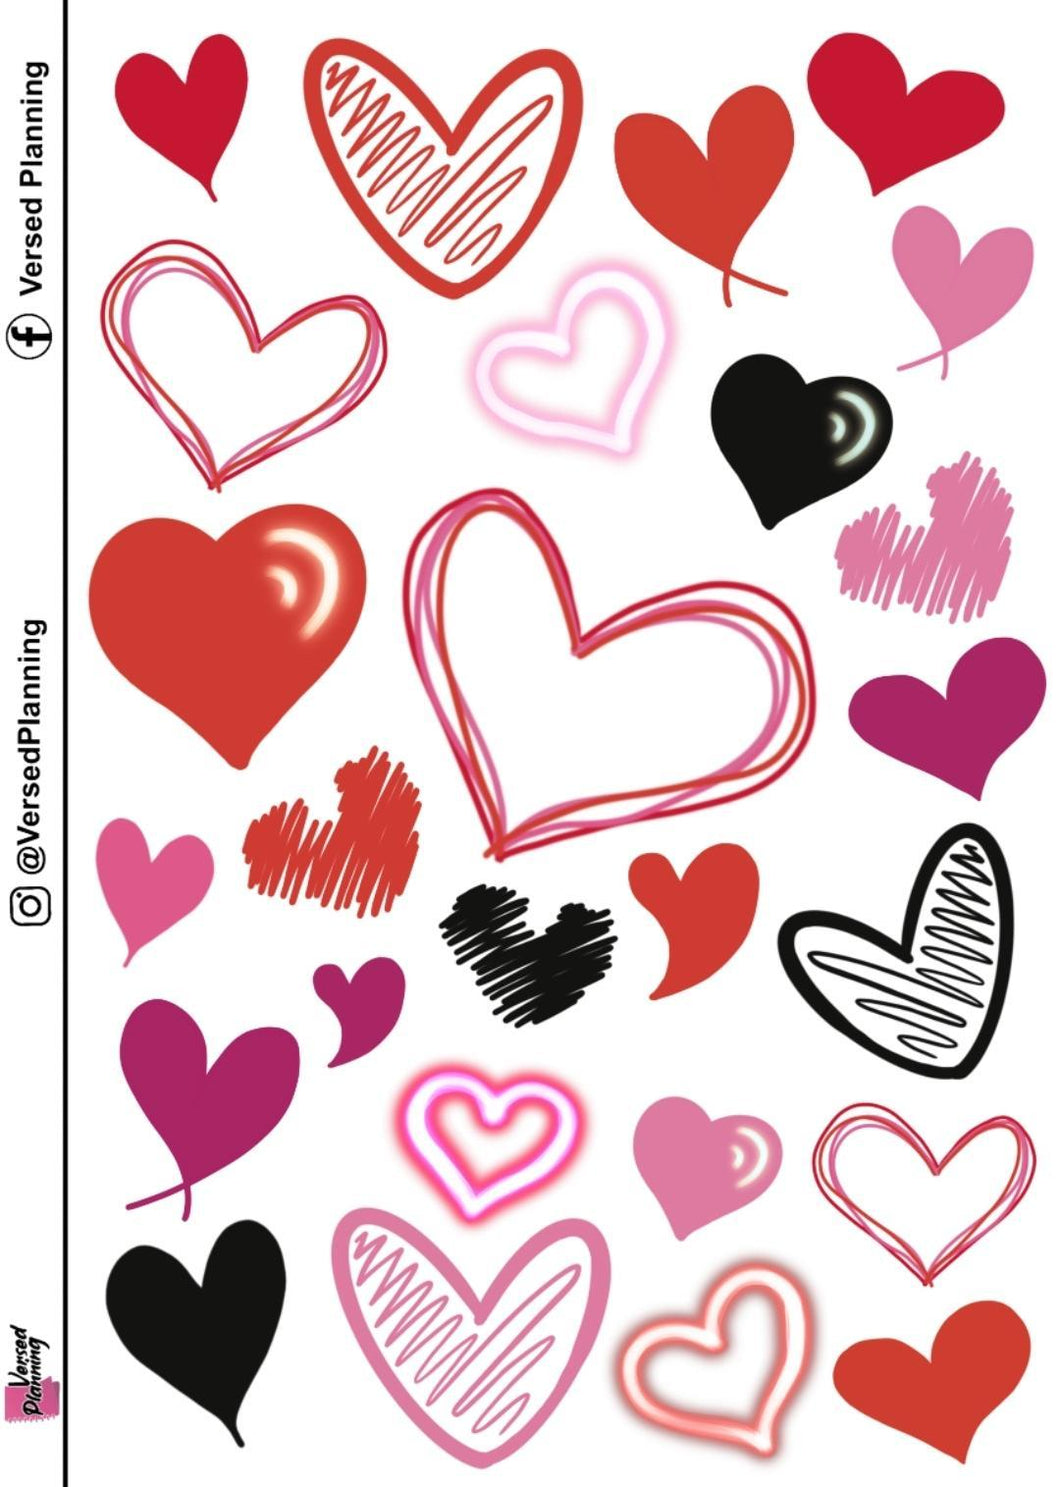 HEARTS All over Love Sheet